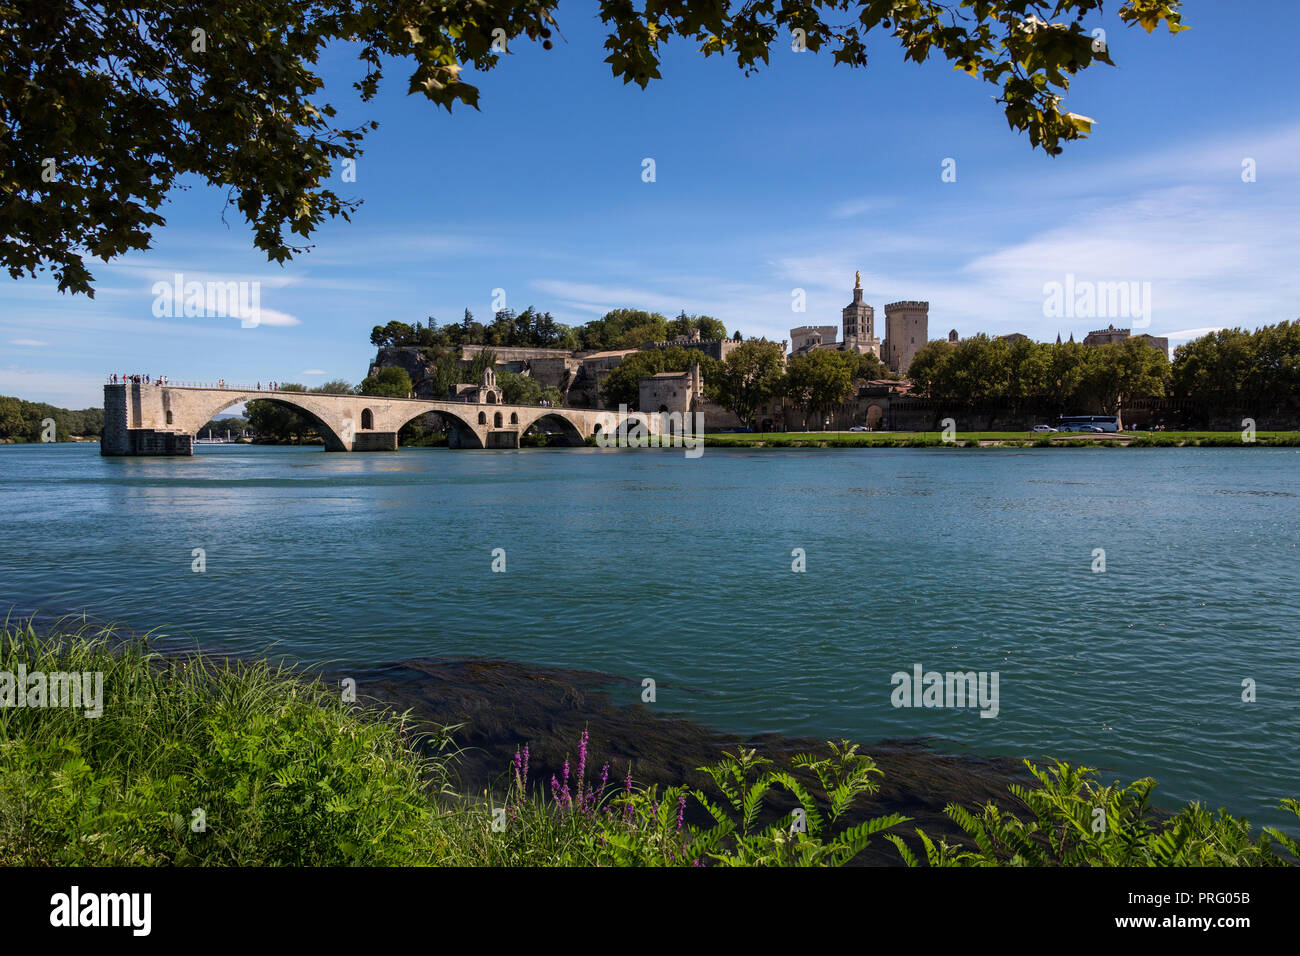 The city of Avignon in the department of Vaucluse on the left bank of the Rhone River in France. it was the residence of the popes during their exile  Stock Photo